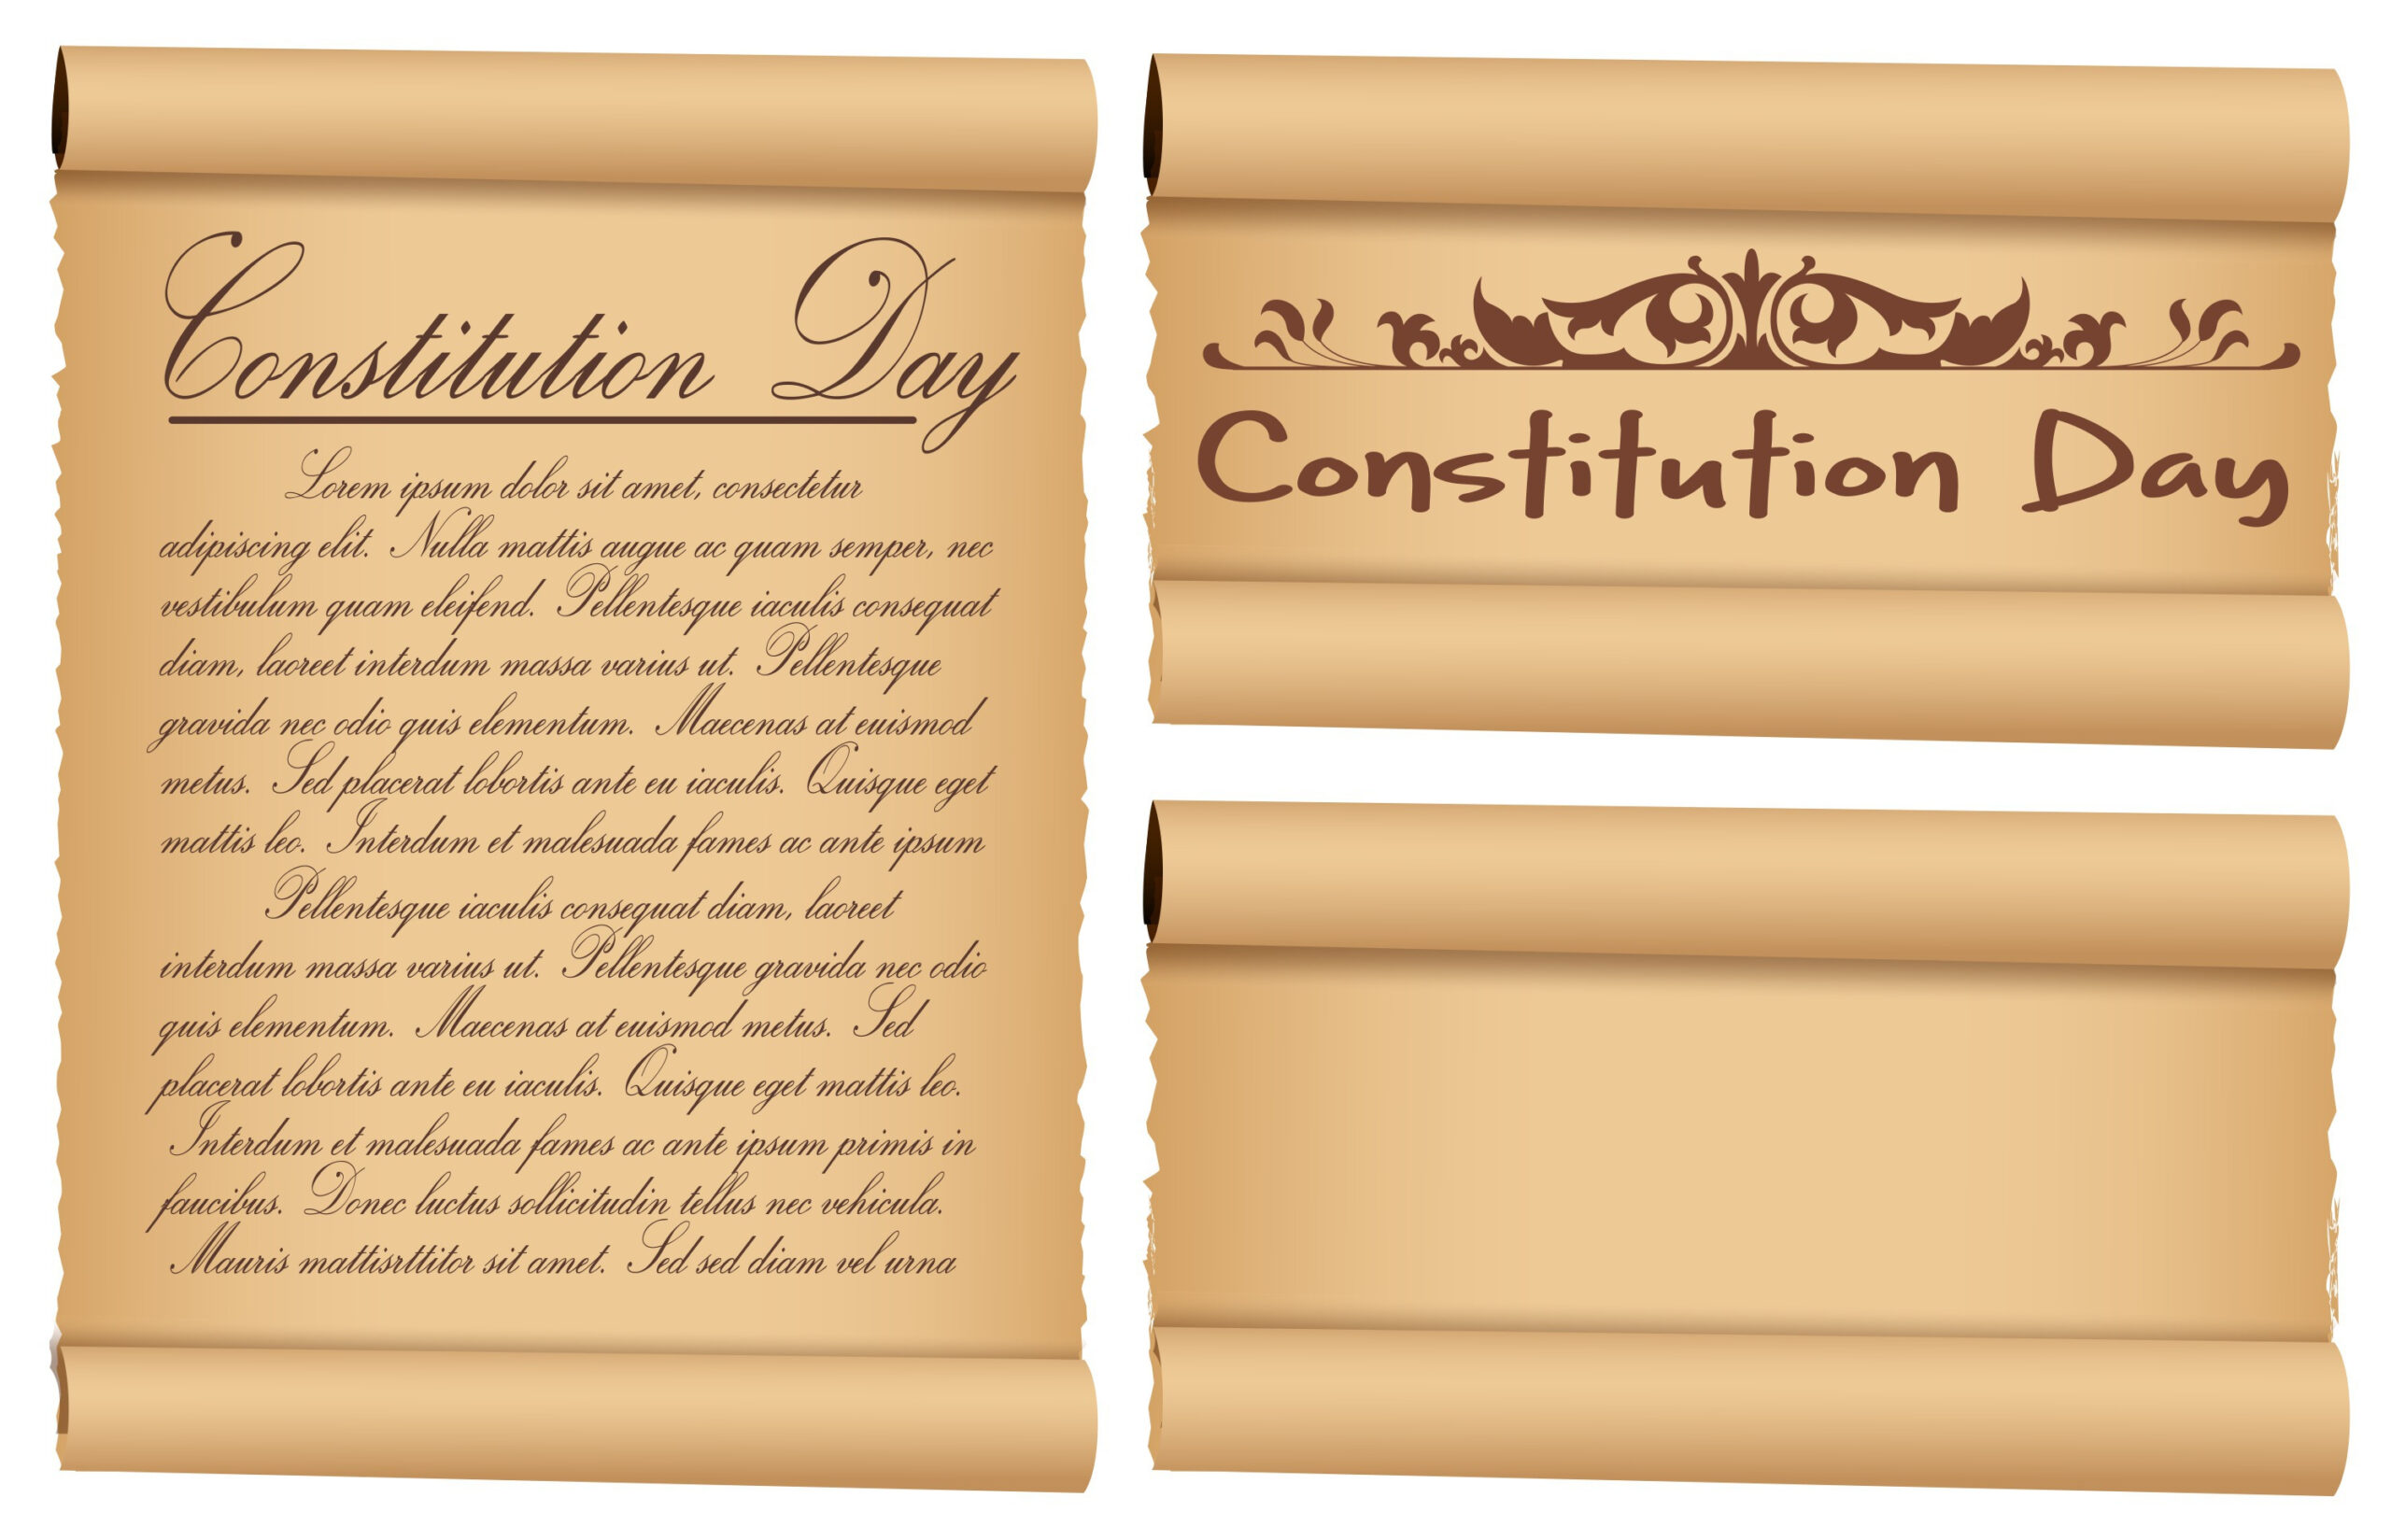 Importance of the Constitution